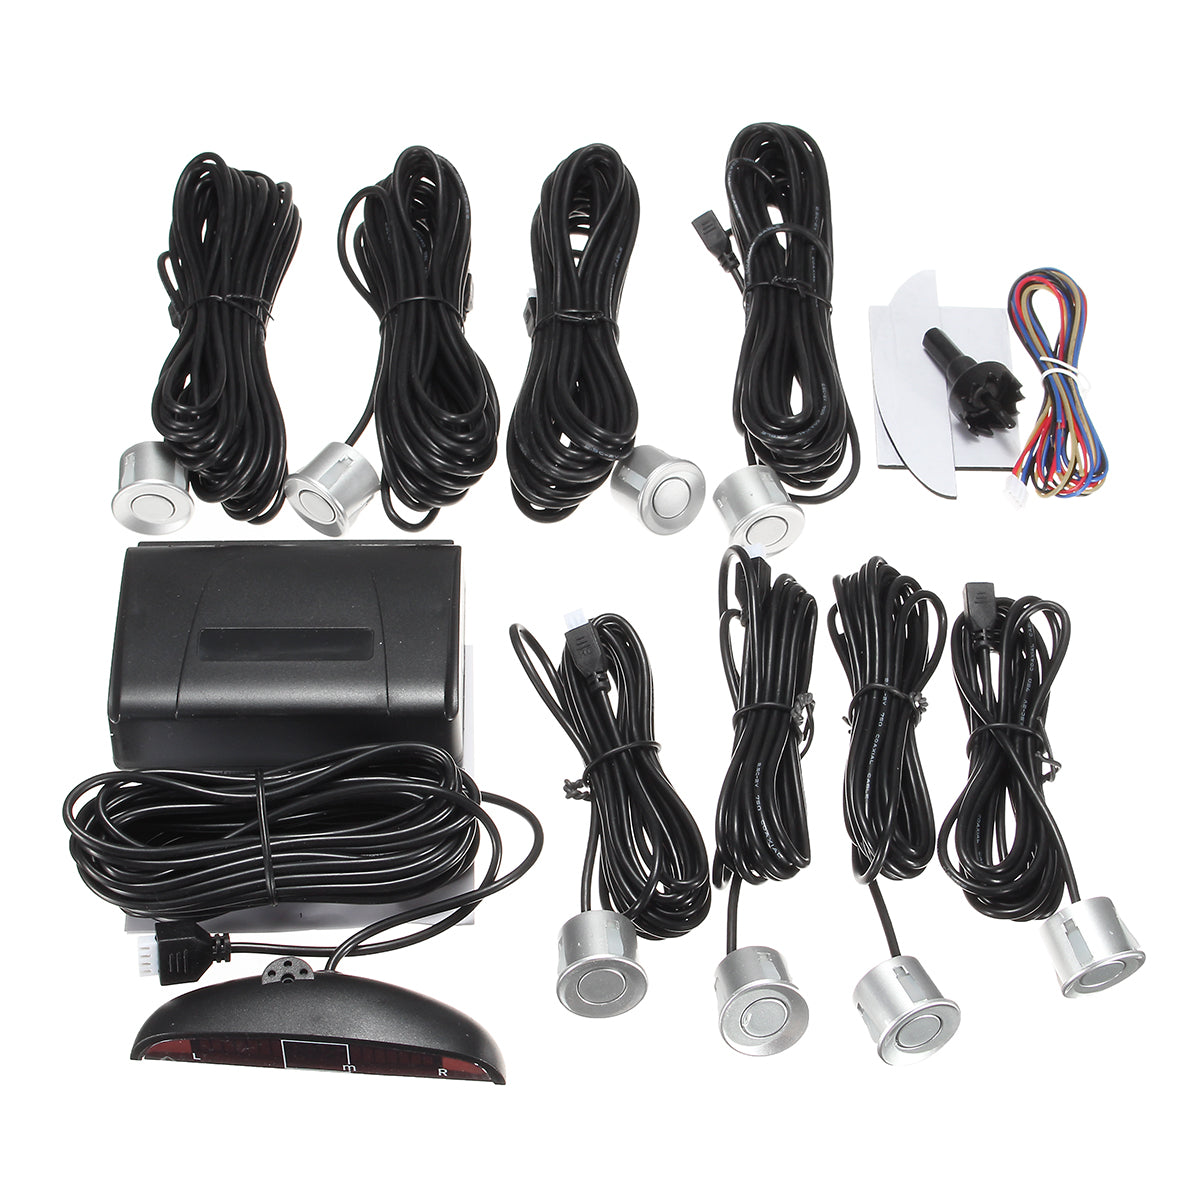 4 Front & 4 Rear LCD Display Monitor Reverse View Backup Parking 8 Car Sensor Buzzer Alarm Detector System - Auto GoShop